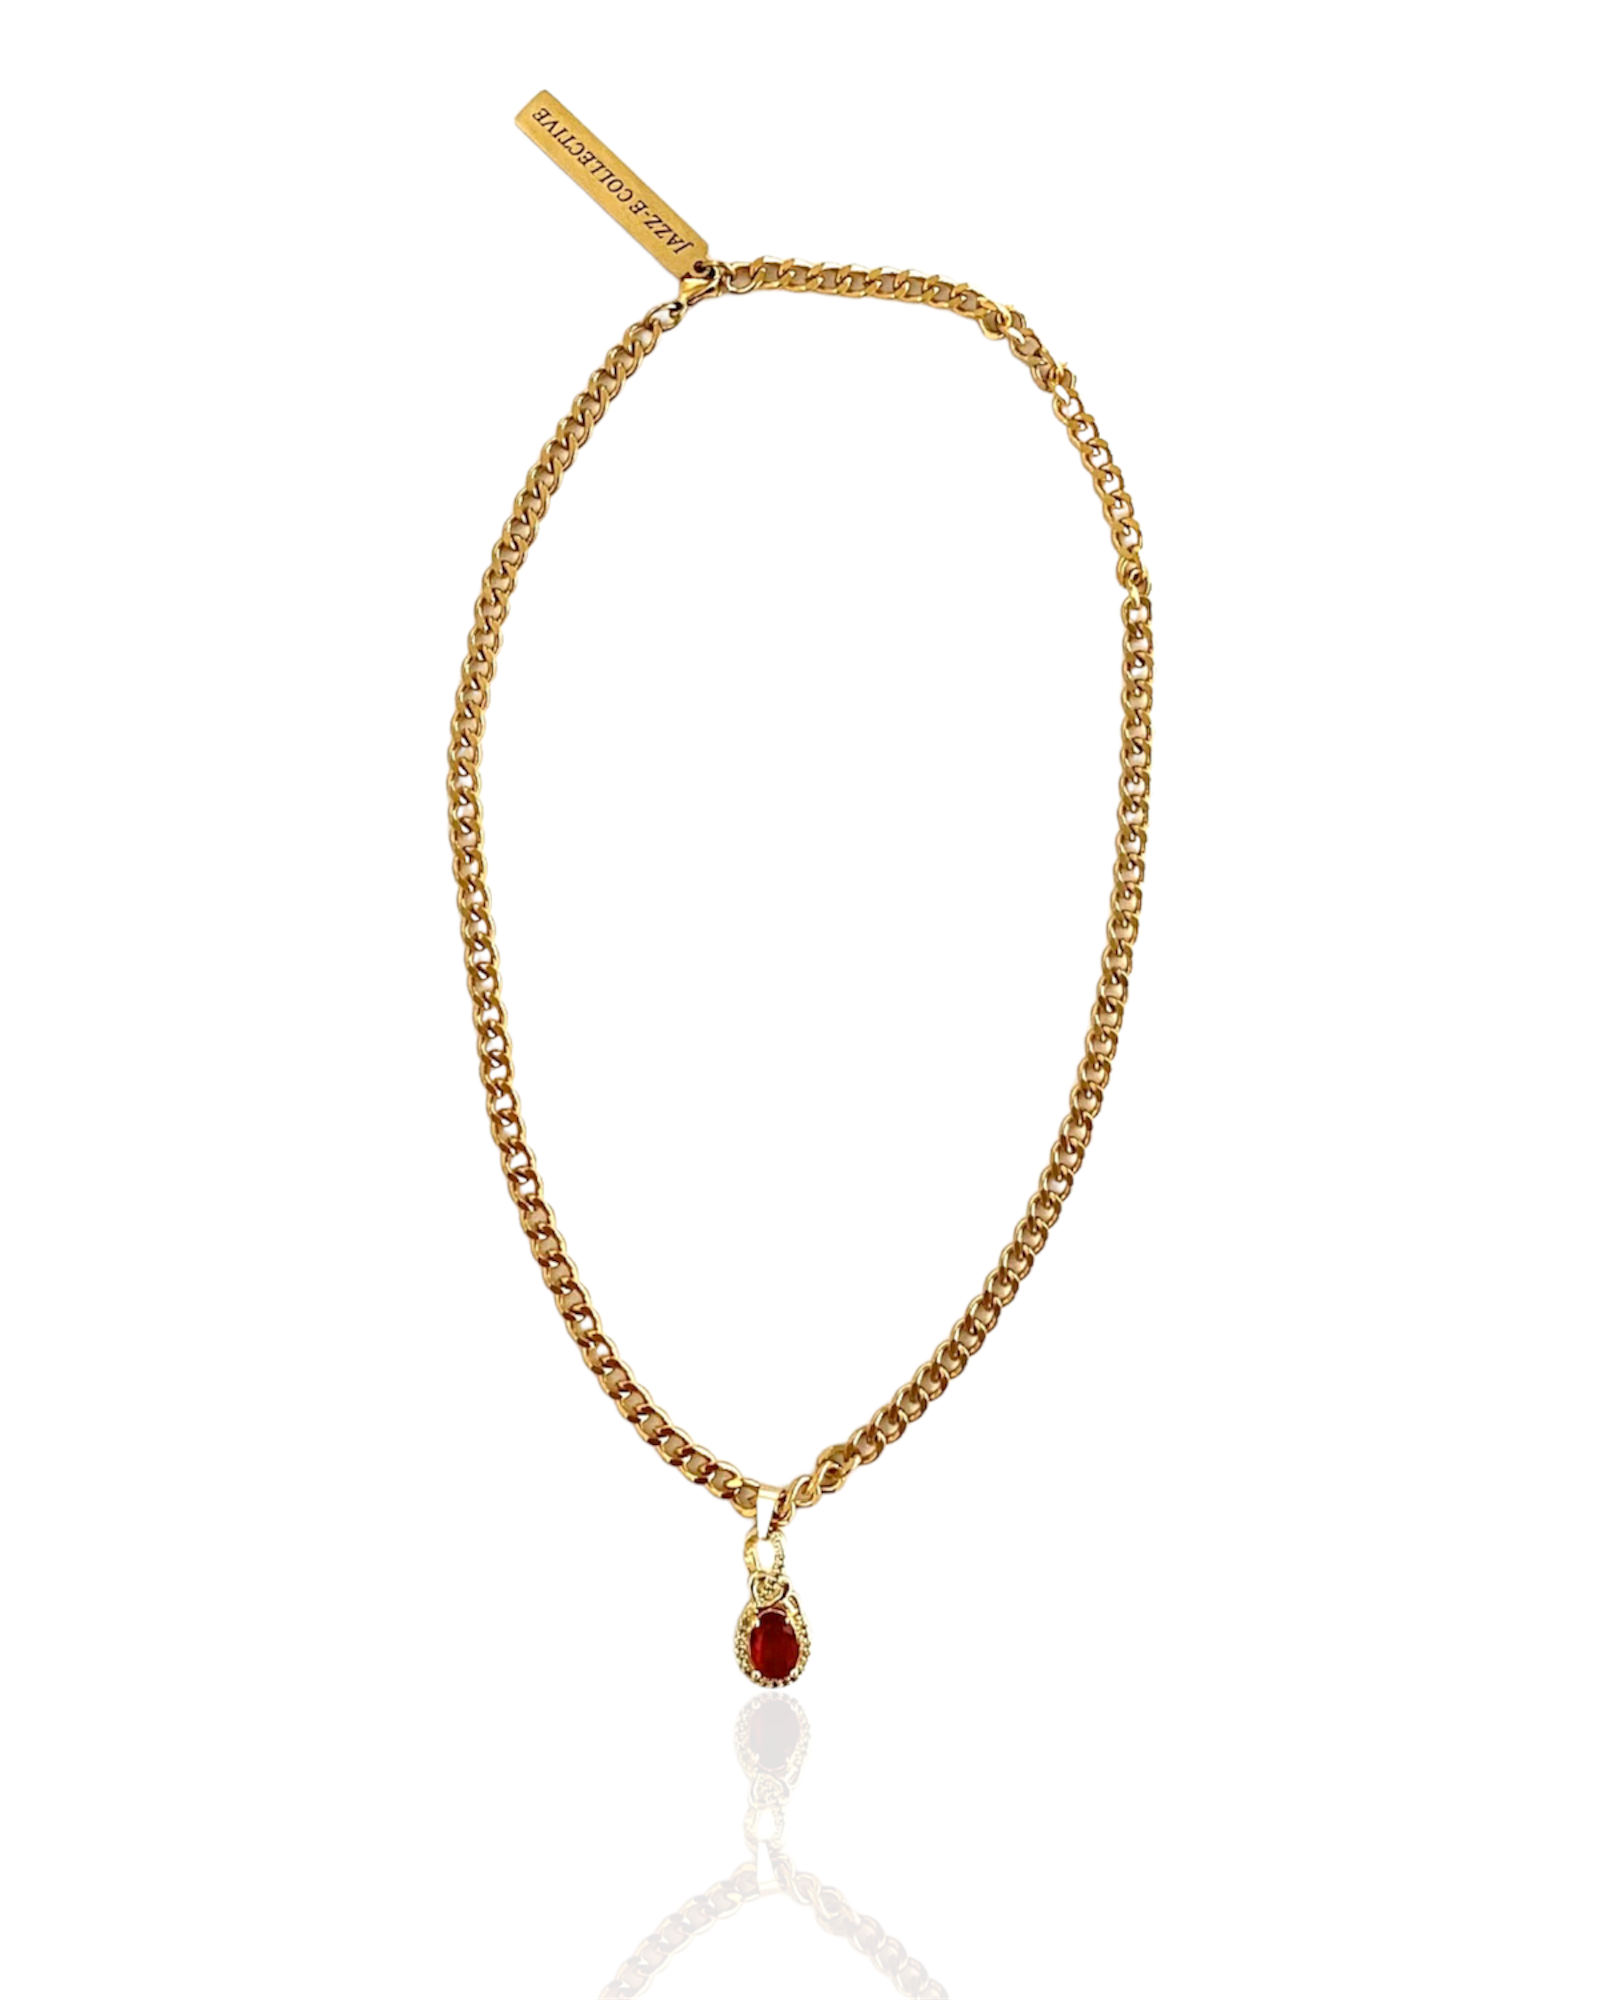 Magnificient 22k Gold Necklace for Women| PC Chandra Tushi Collection